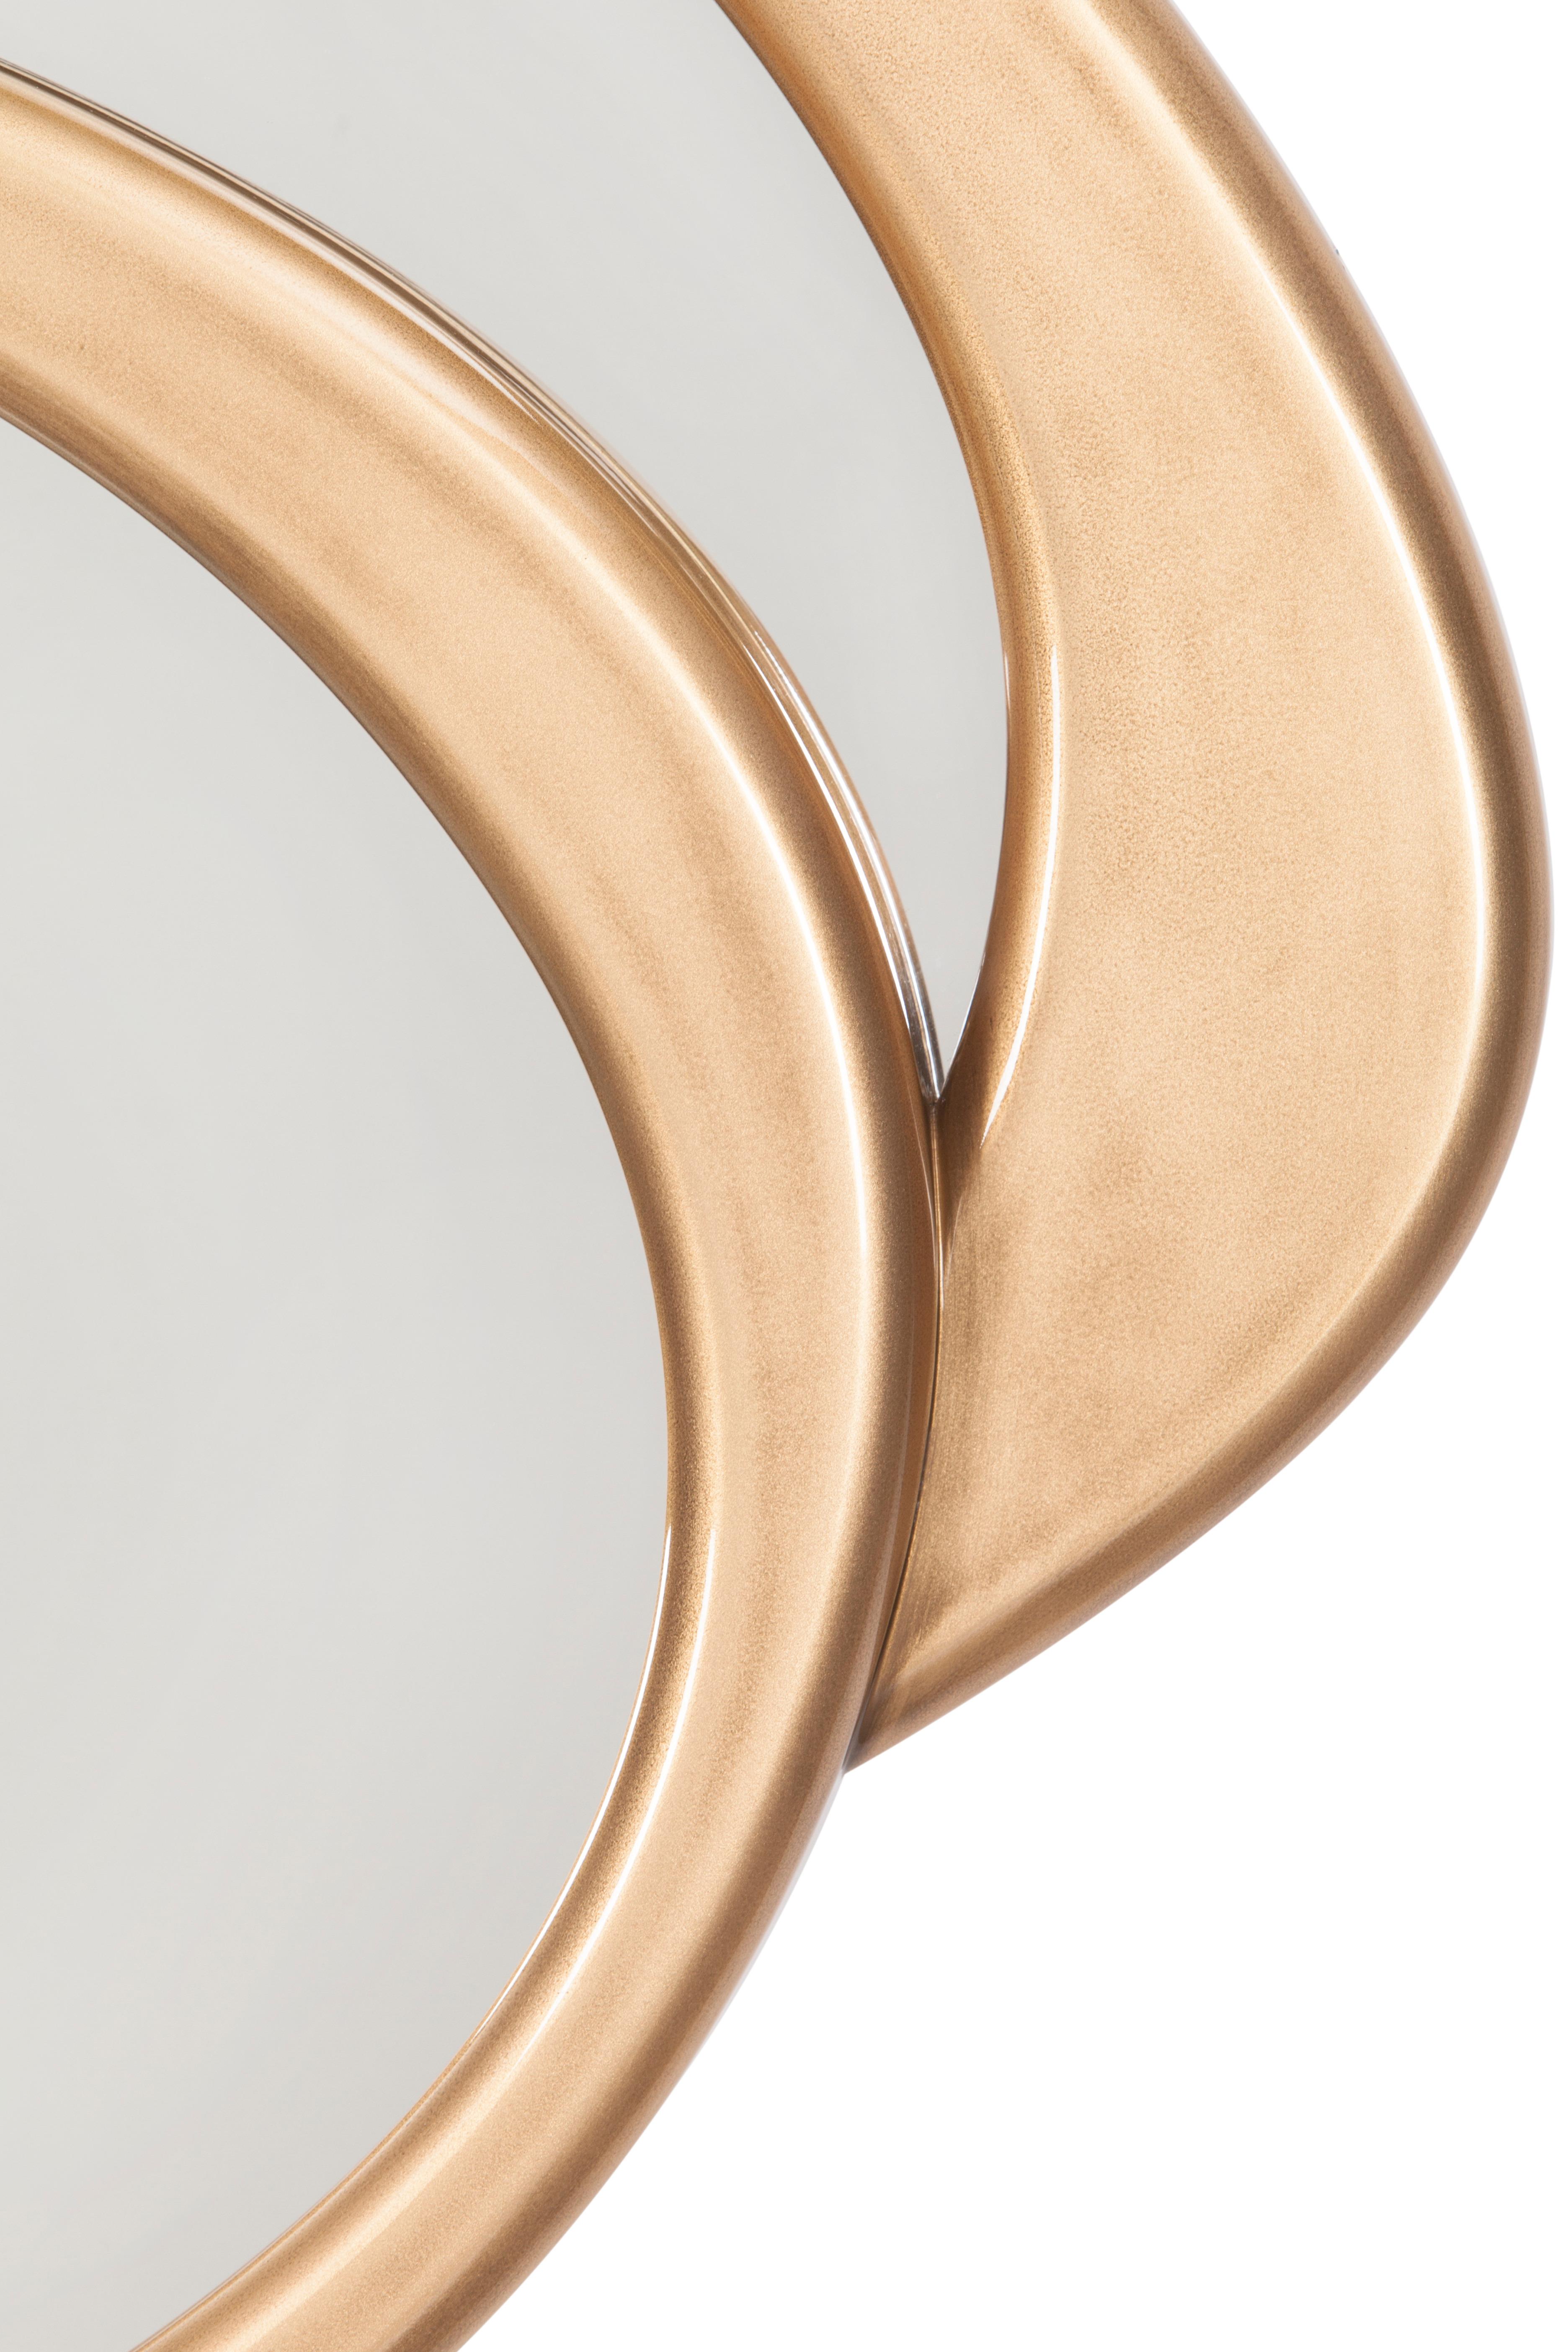 Modern Biarritz Wall Mirror Gold Lacquered Handmade in Portugal by Greenapple In New Condition For Sale In Lisboa, PT